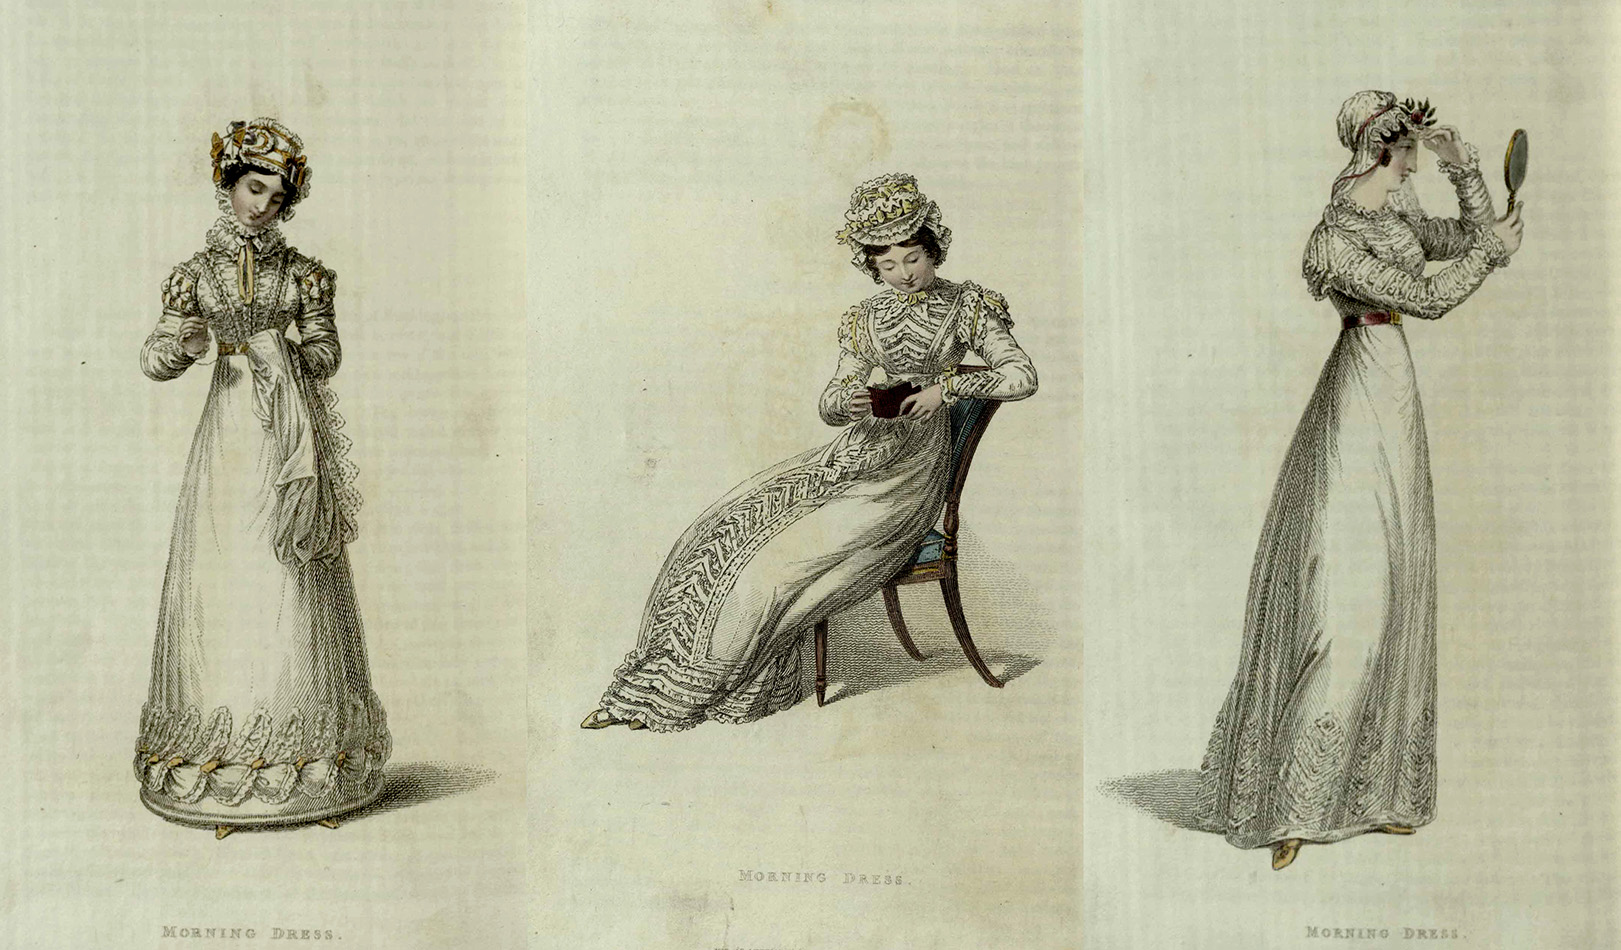 1820s Fashion plates from Ackermann's Repository featuring muslin gowns.